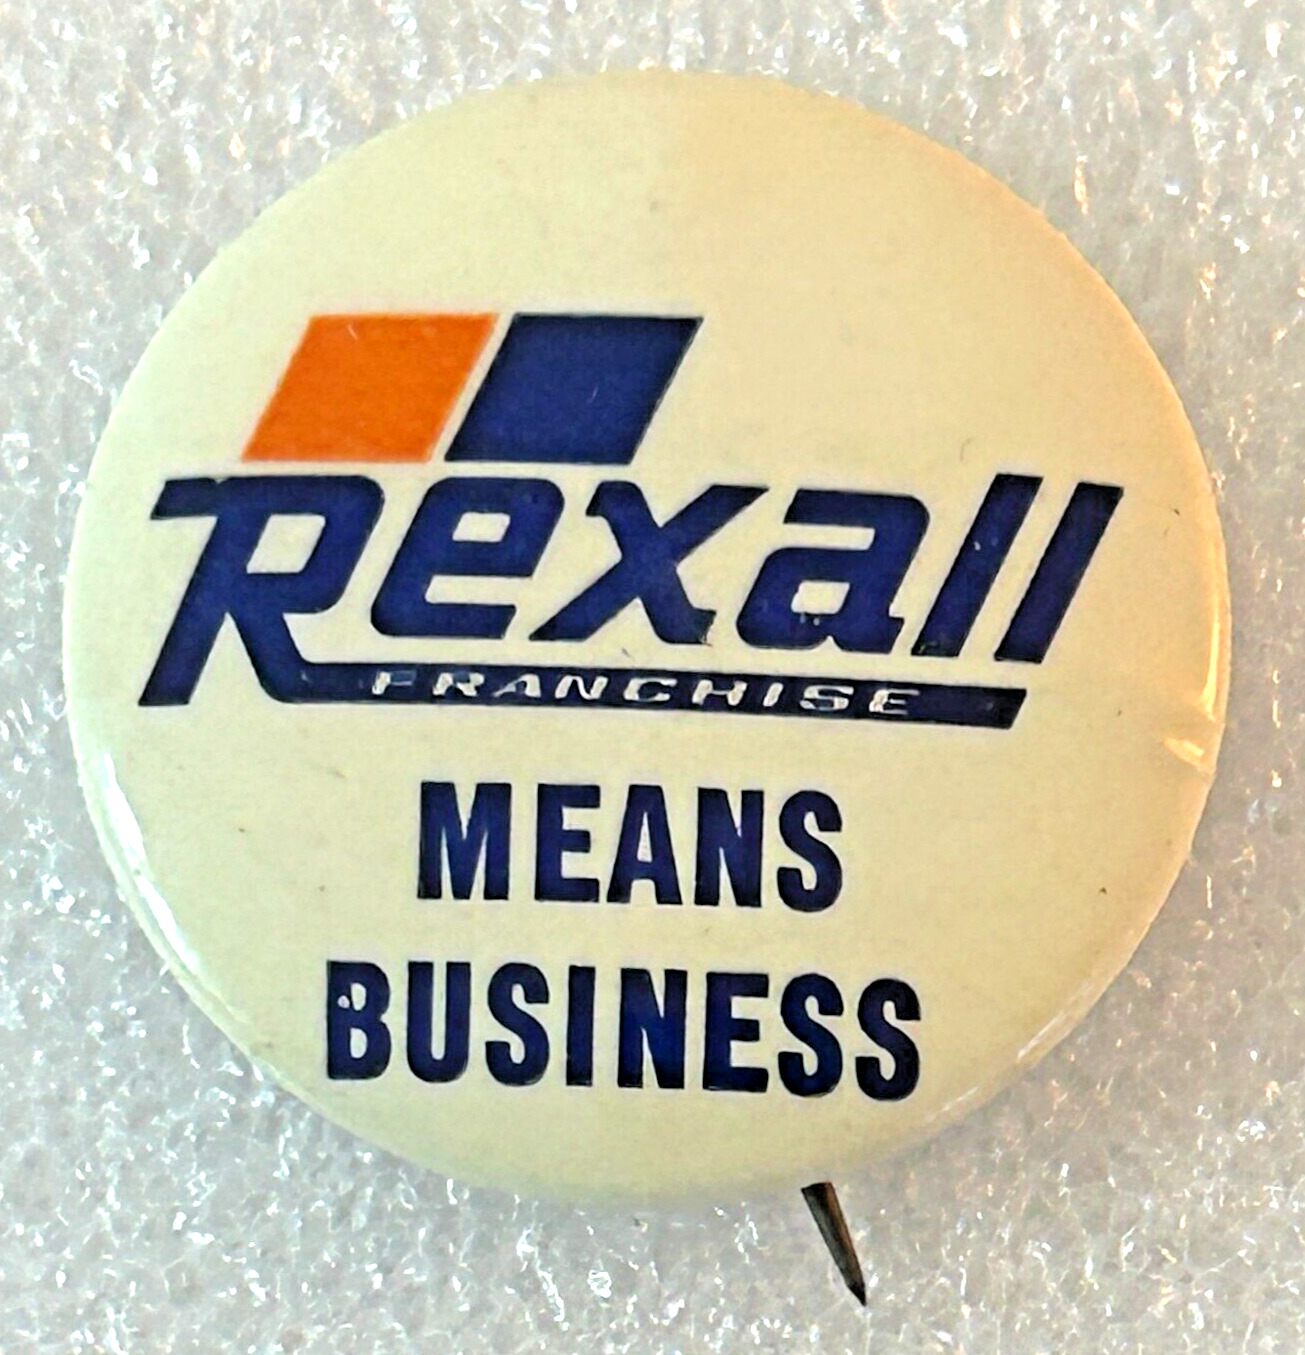 Vintage Rexall Means Business Franchise Drugstore Advertising Pin Pinback Button